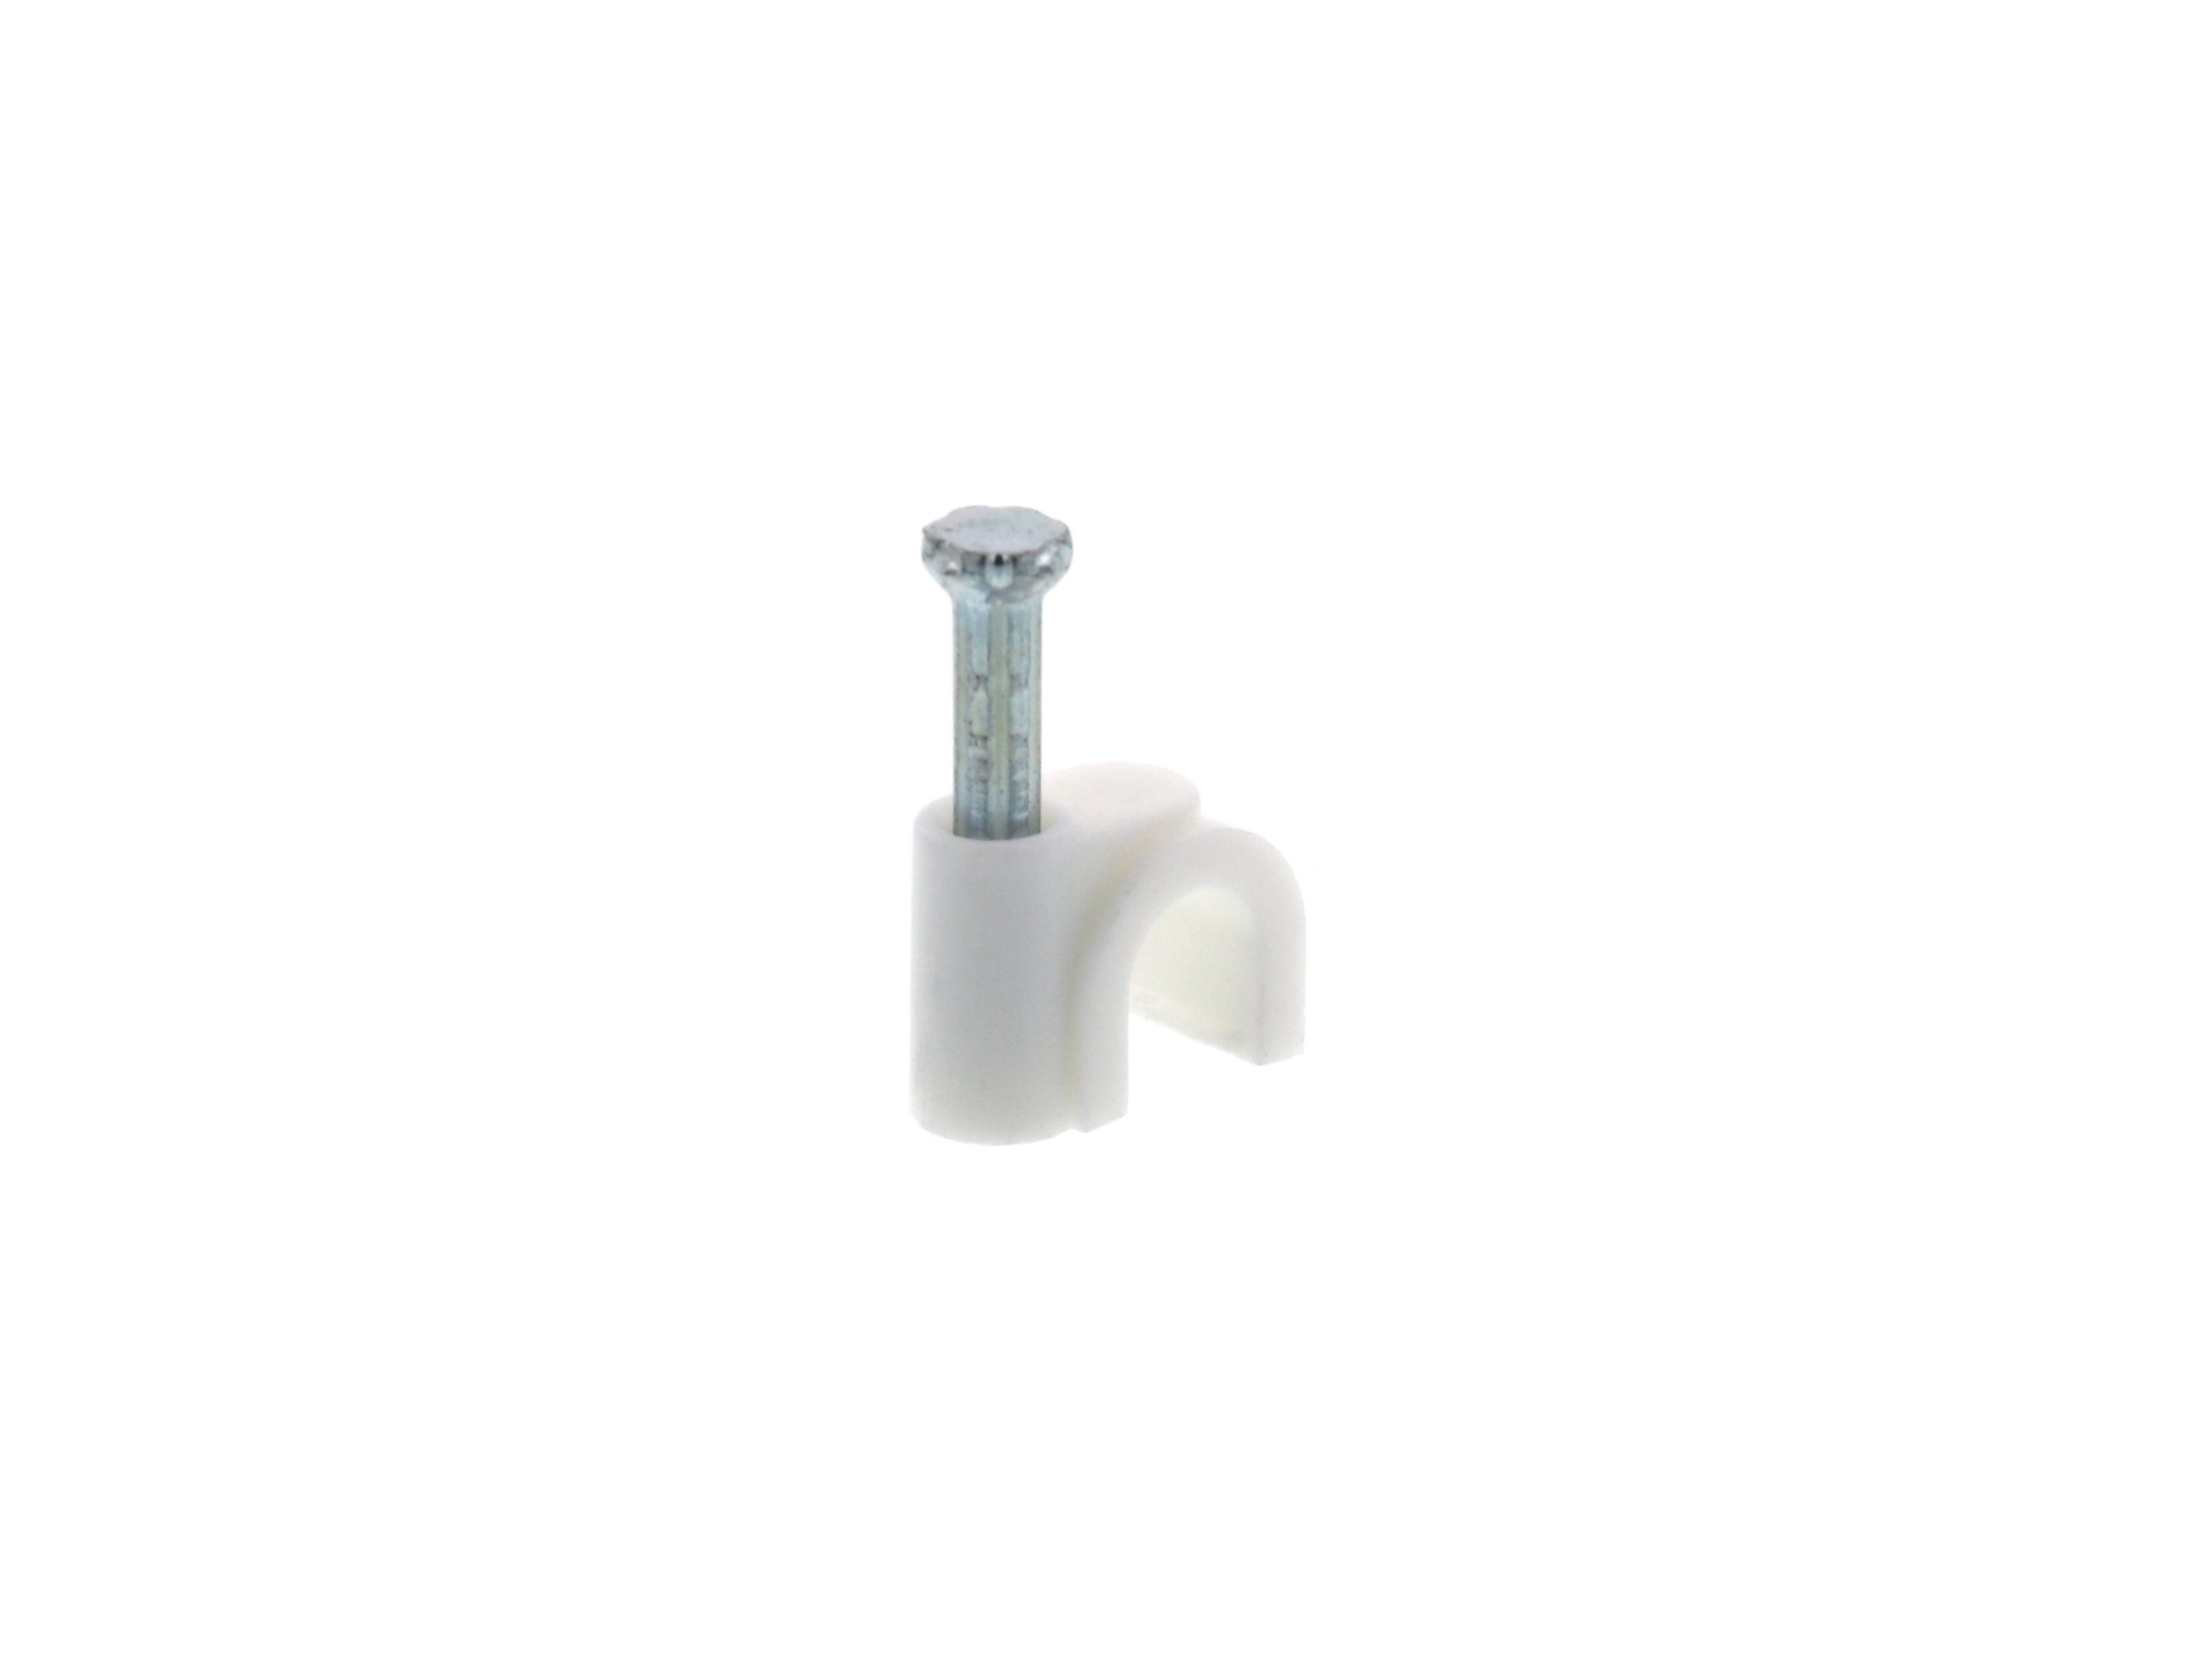 Packs of 100 Round White Cable Clips 6mm with Fixing Nails 